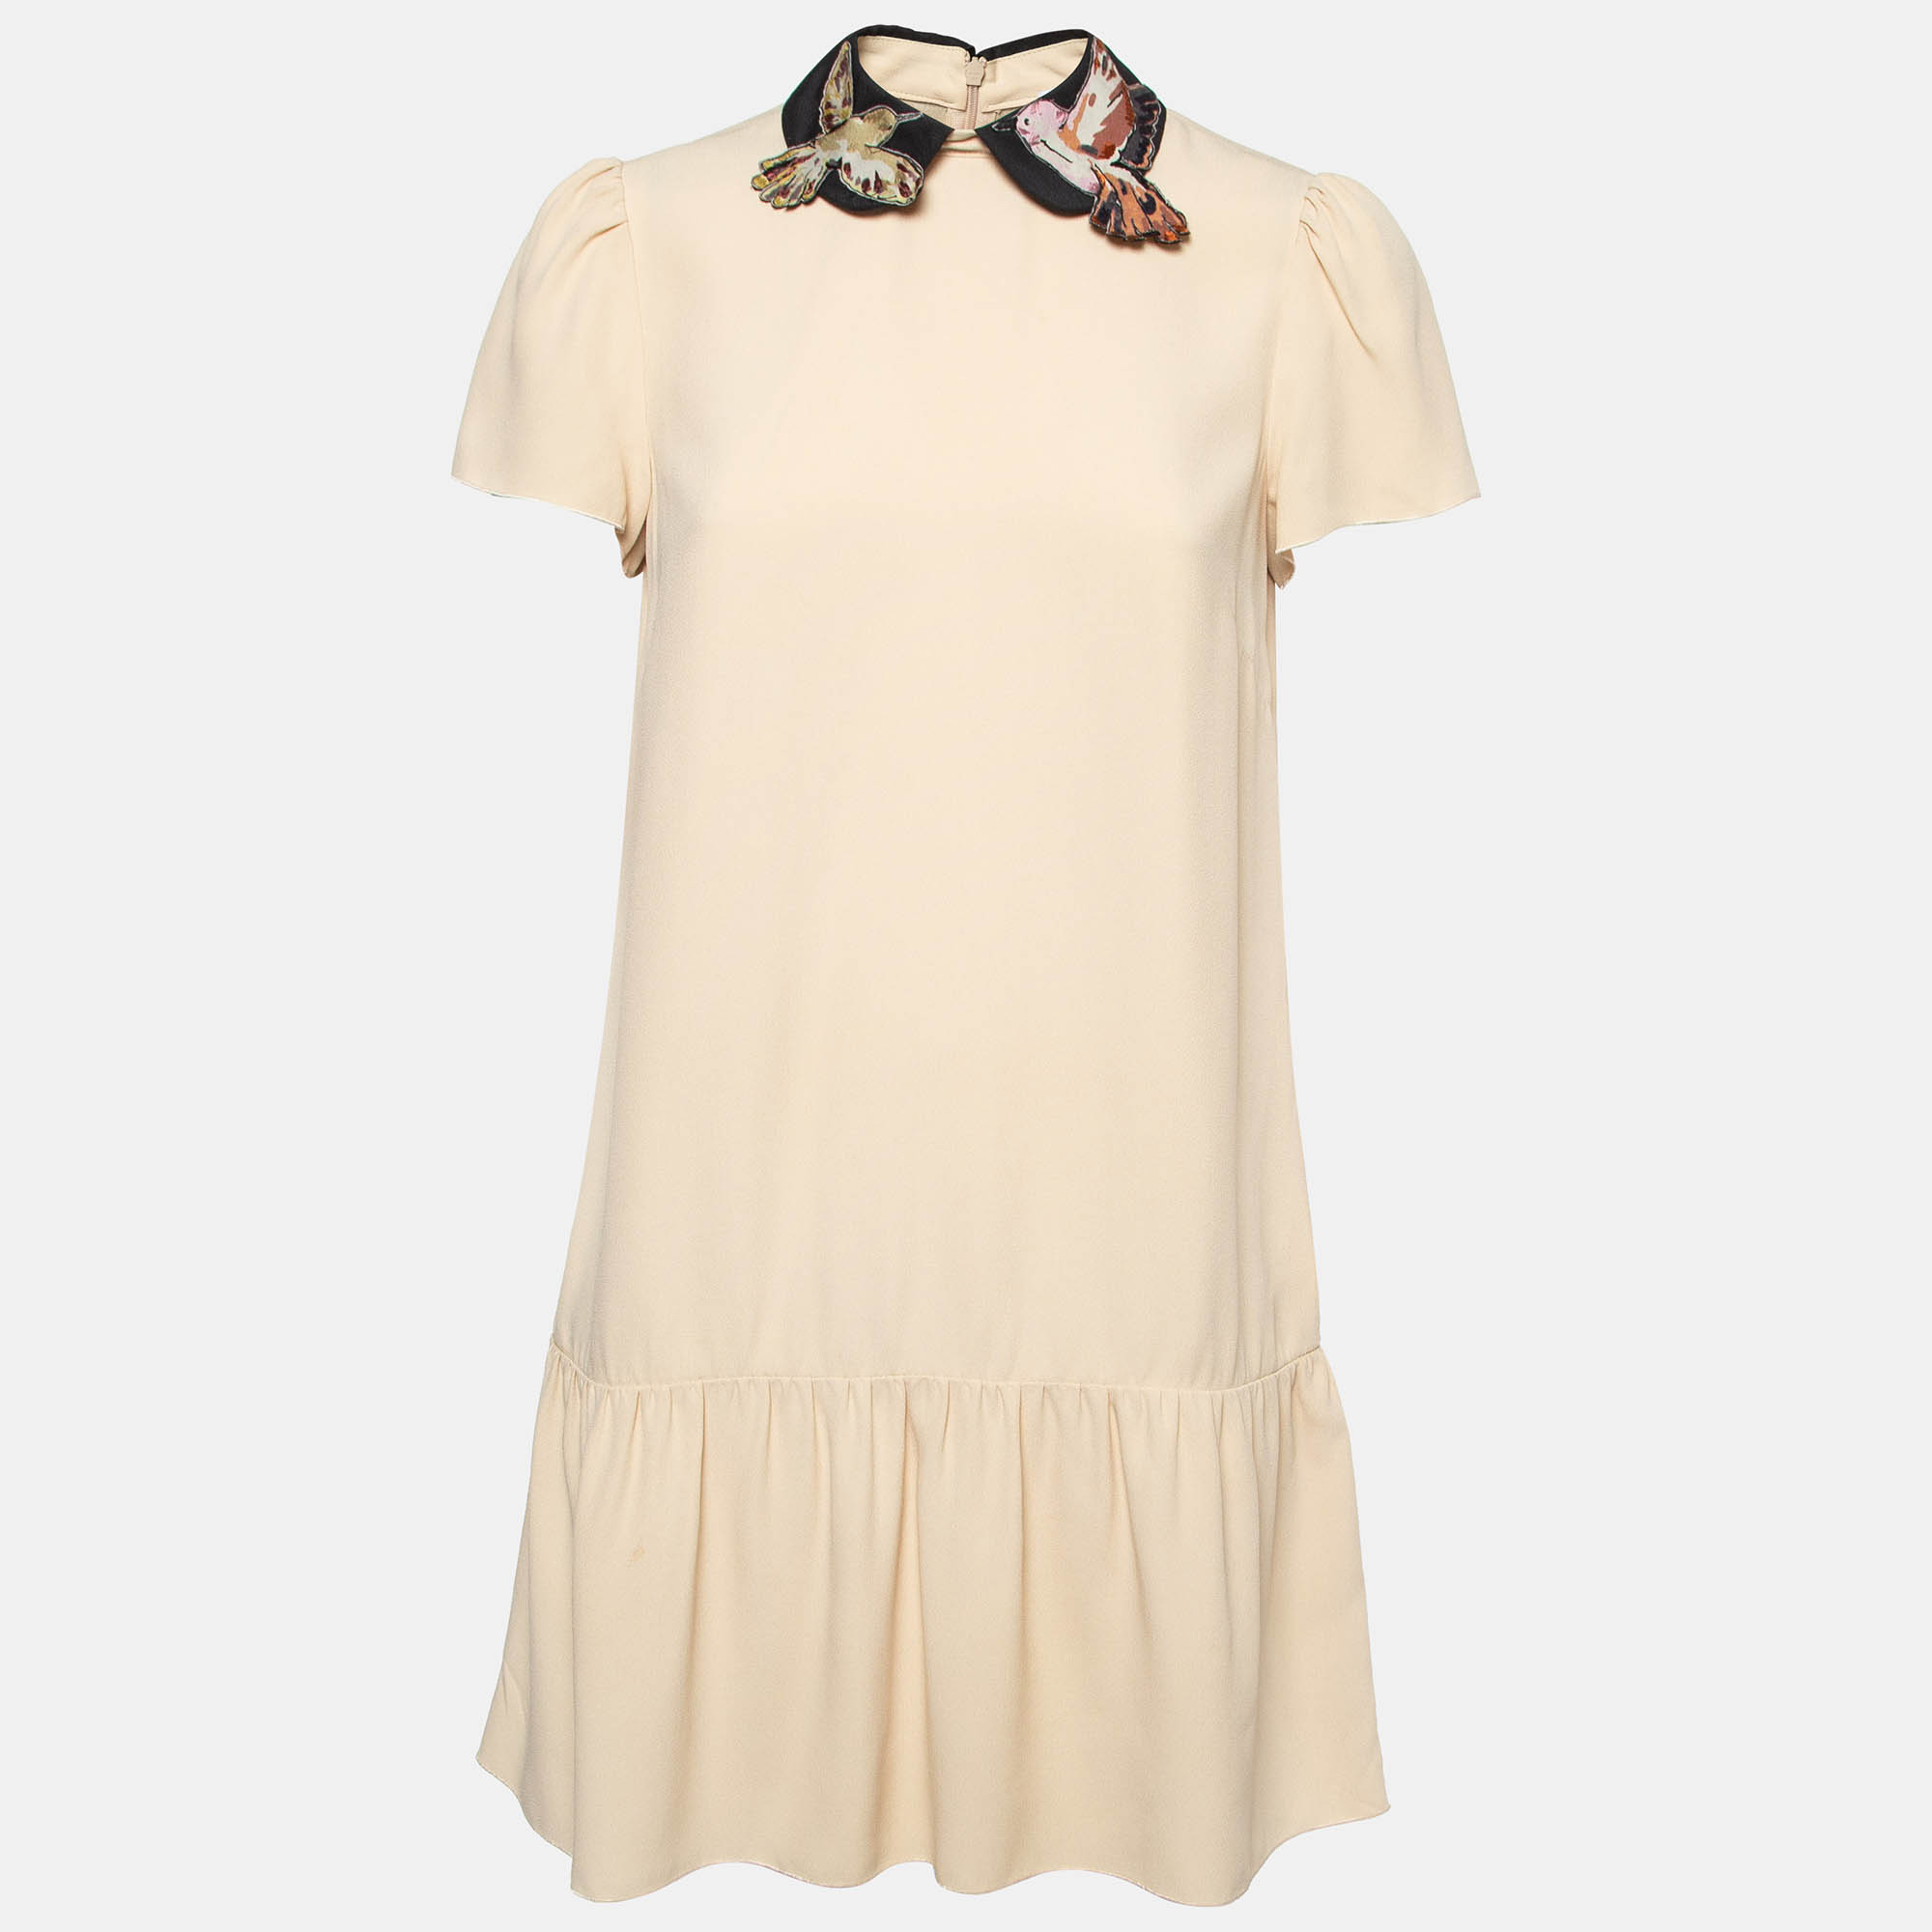 Red valentino beige embroidered peter pan collar sateen flounce mini dress s